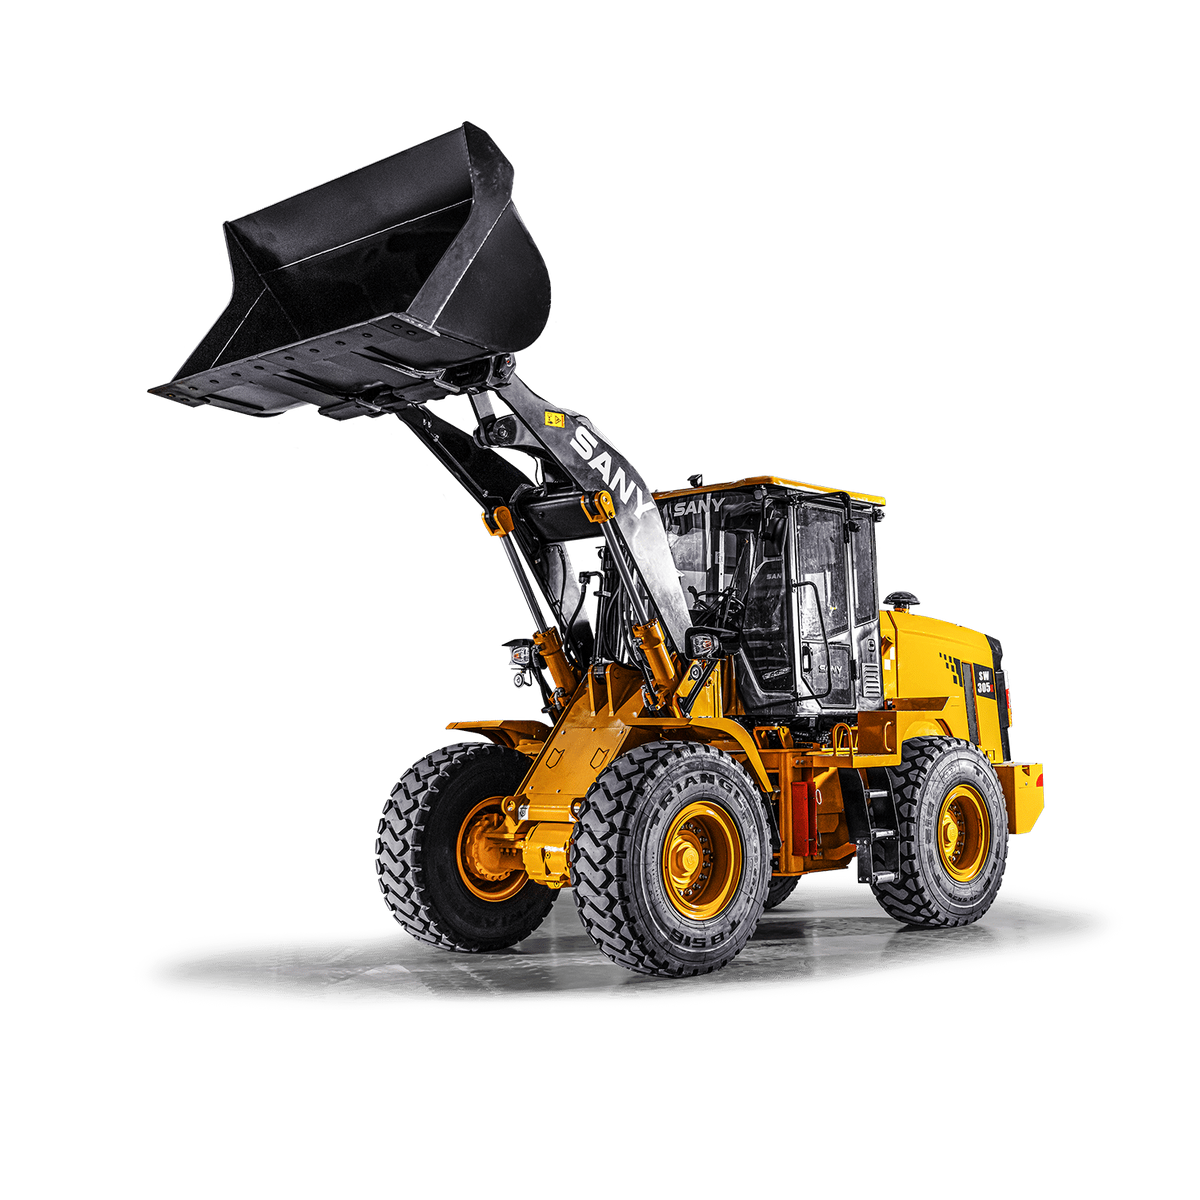 Two brand new Sany wheel loaders to debut at Plantworx 2023